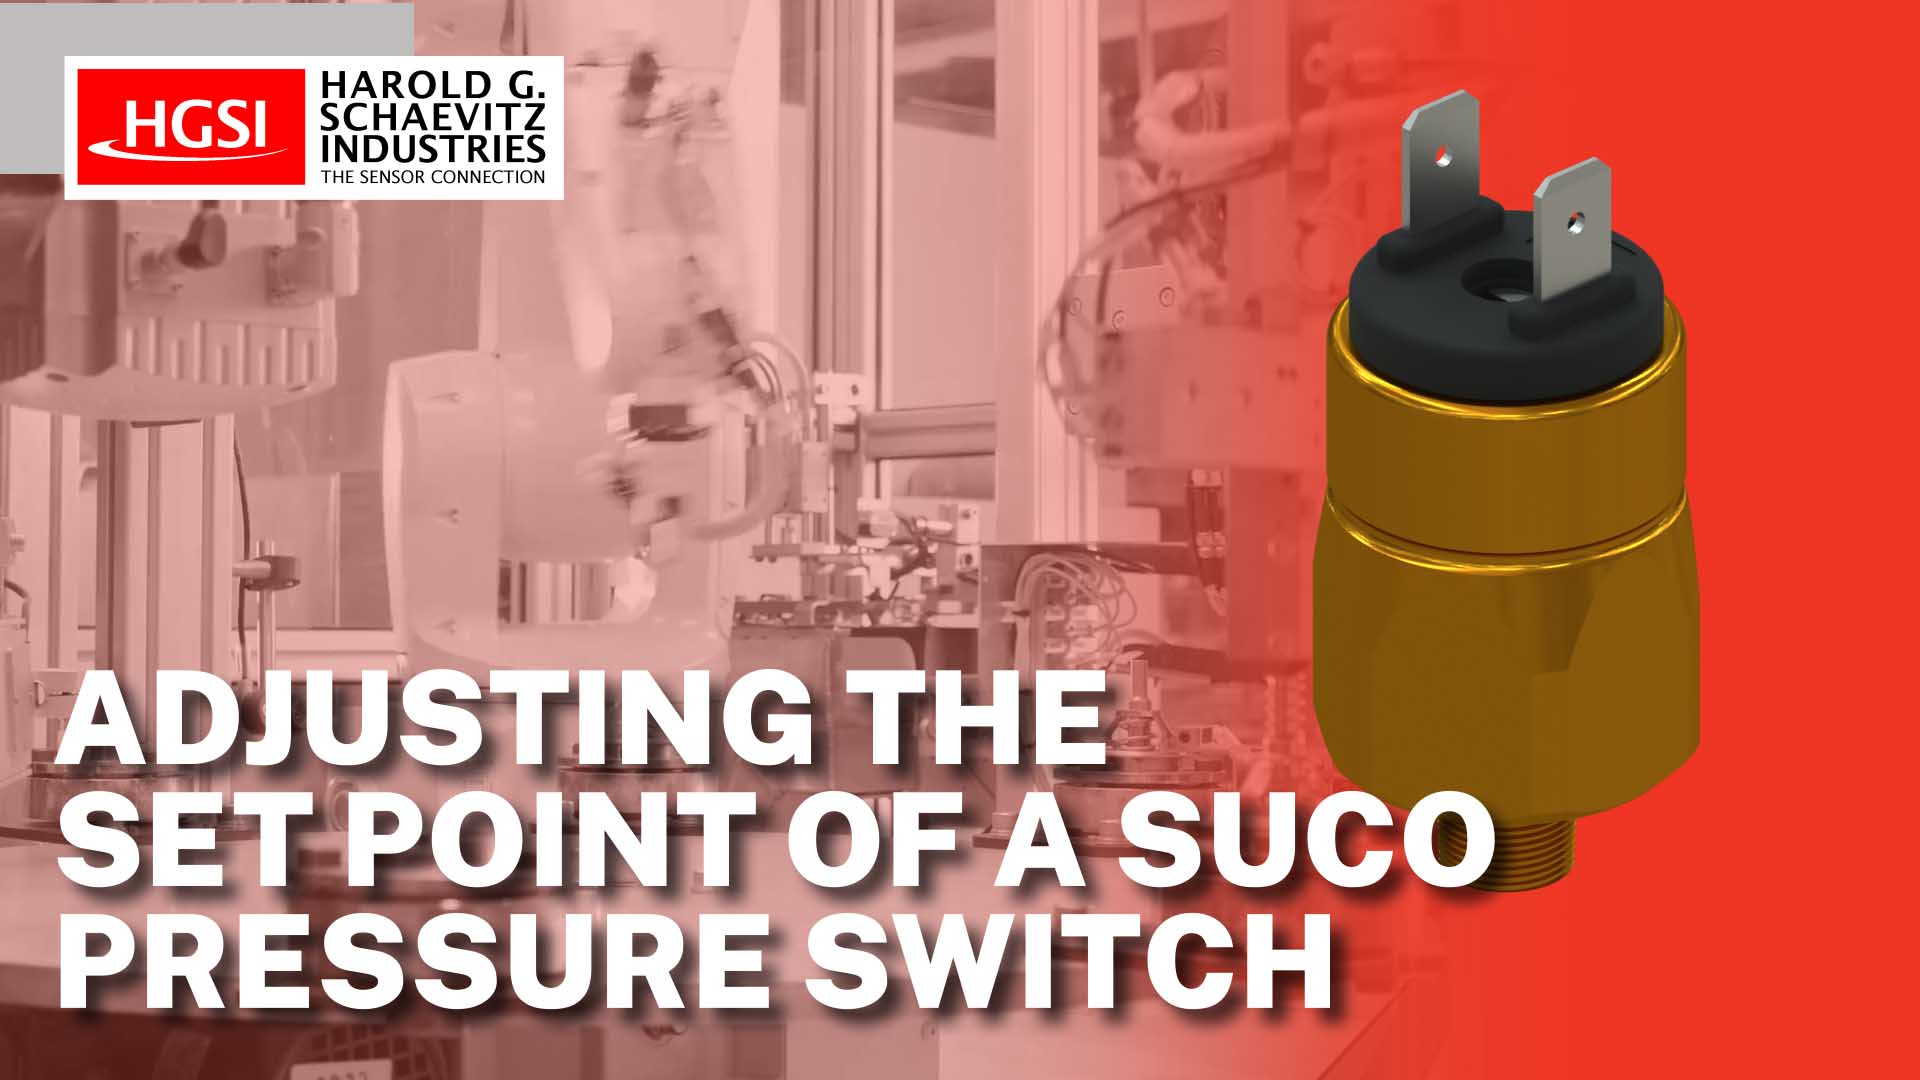 How to Adjust the Setpoint of a Suco Pressure Switch